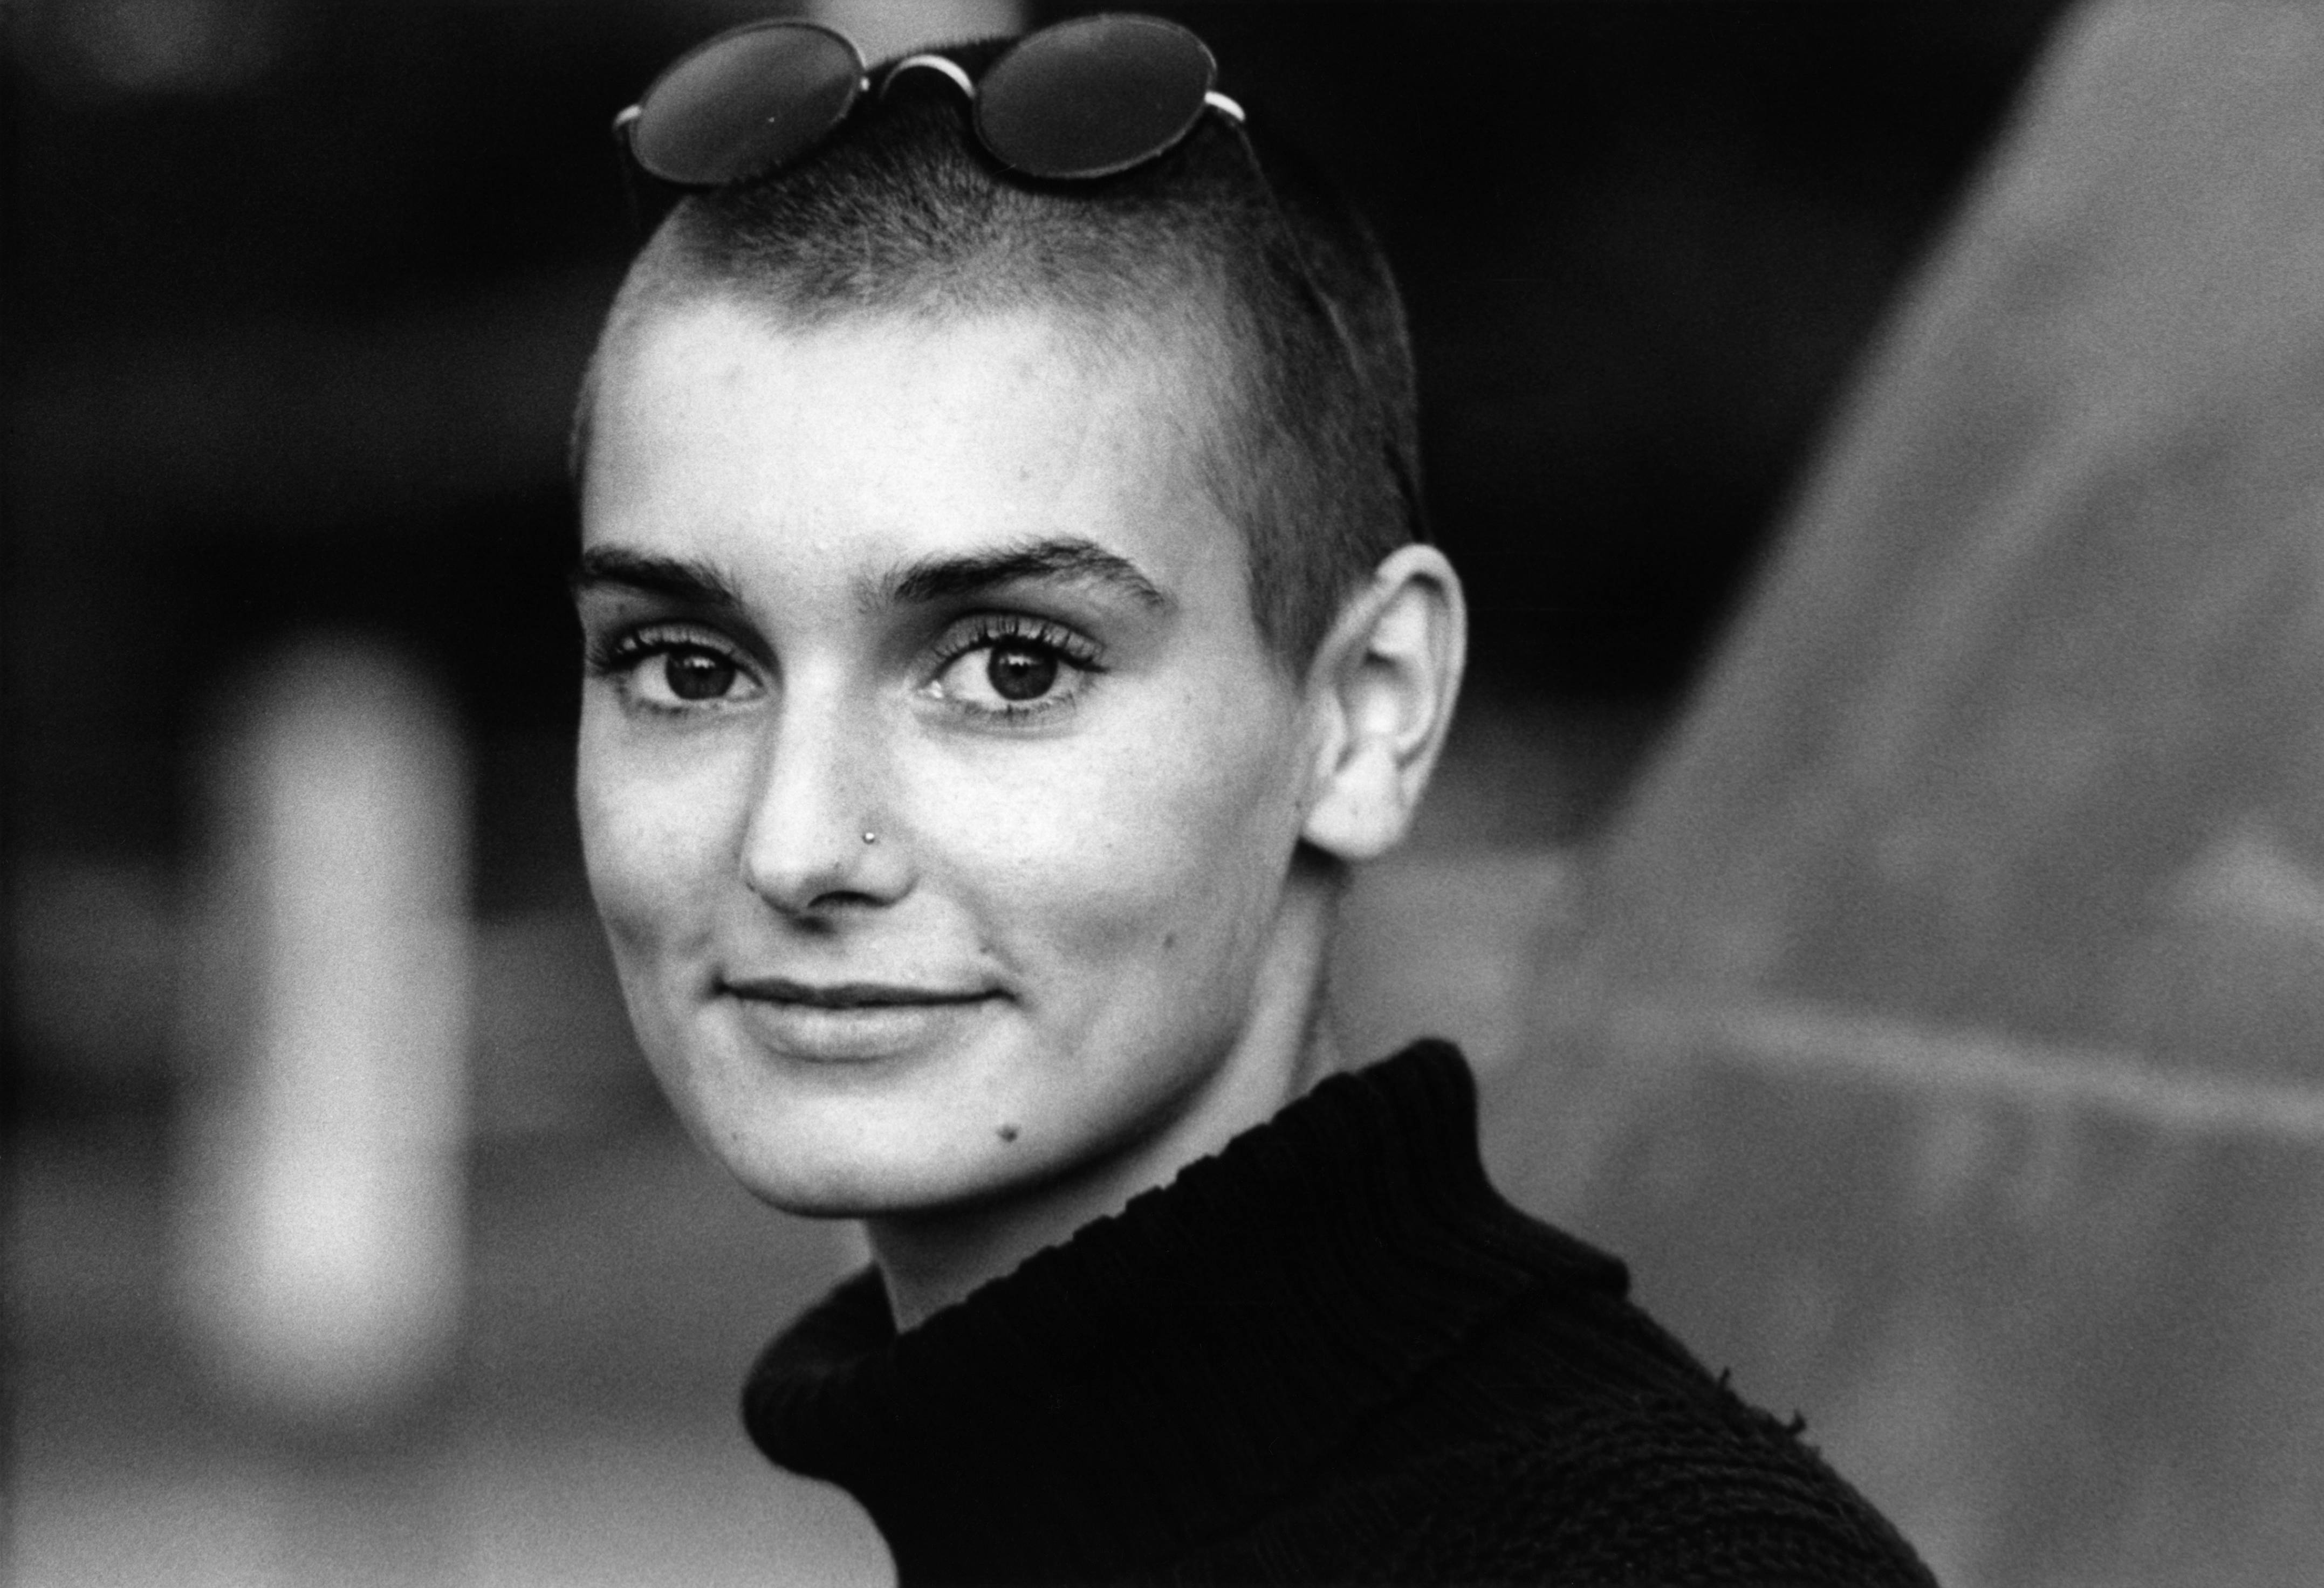 Sinéad O'Connor posing for a portrait in 1990. | Source: Getty Images